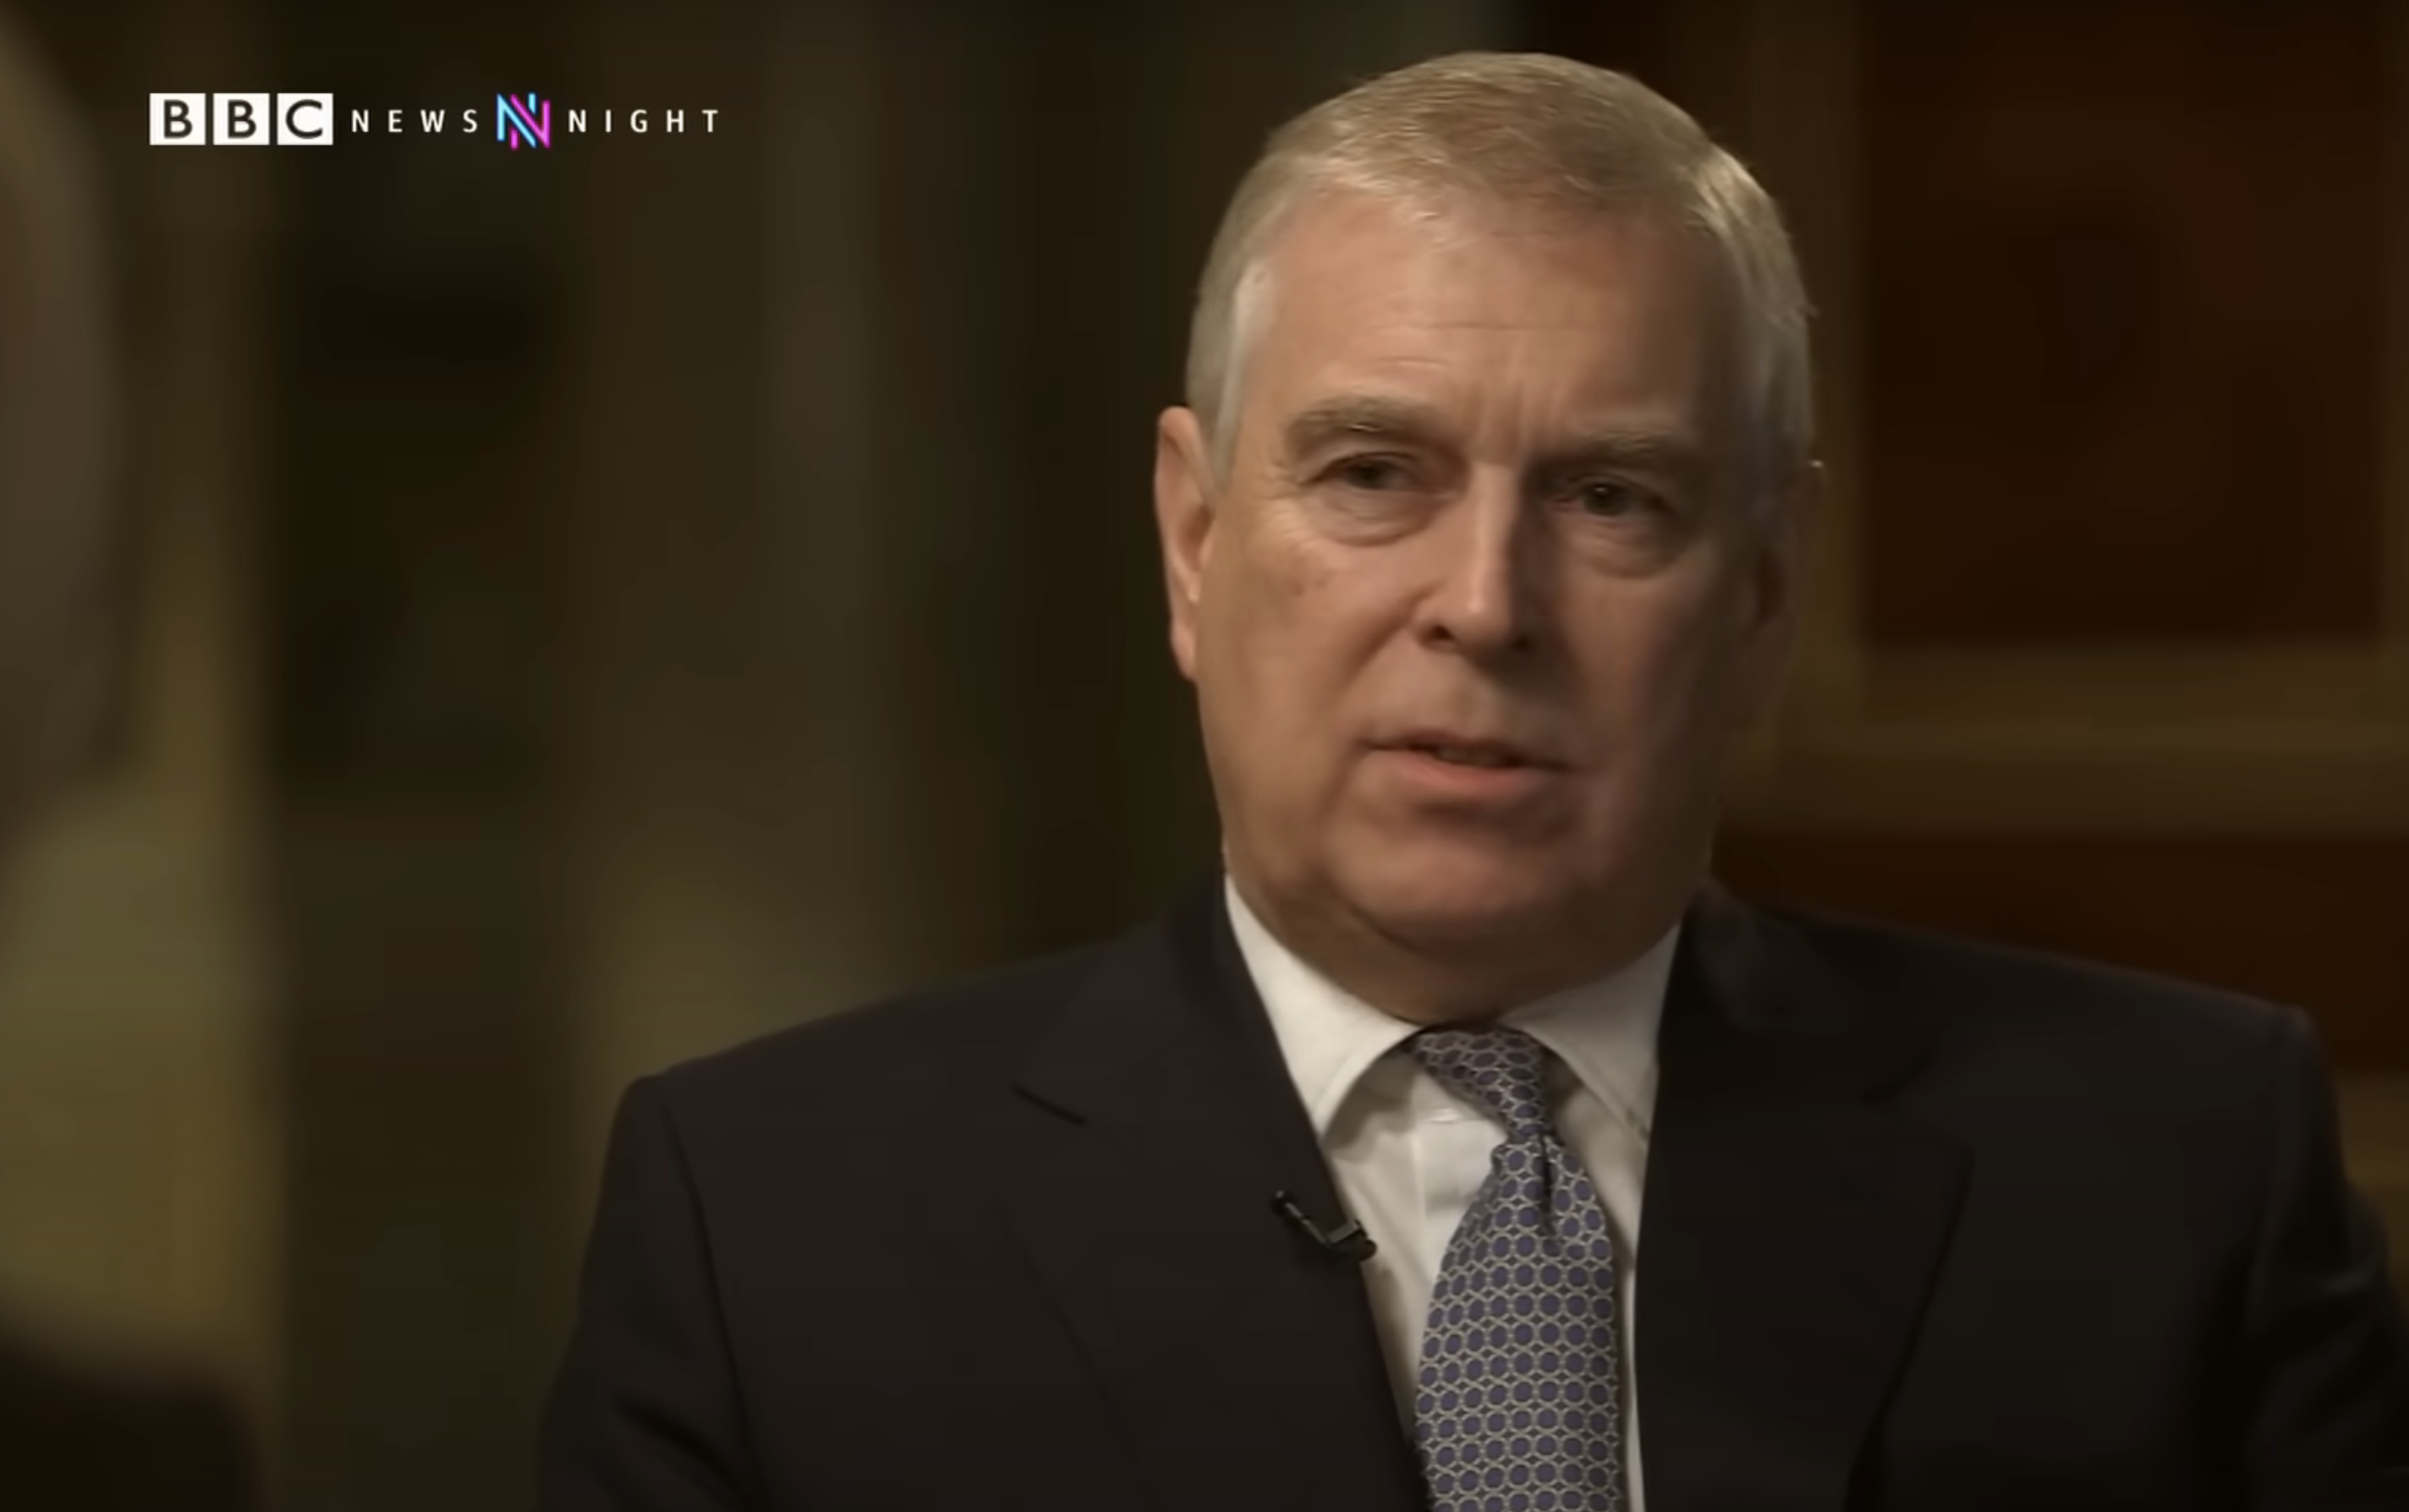 Prince Andrew during a BBC Newsnight interview